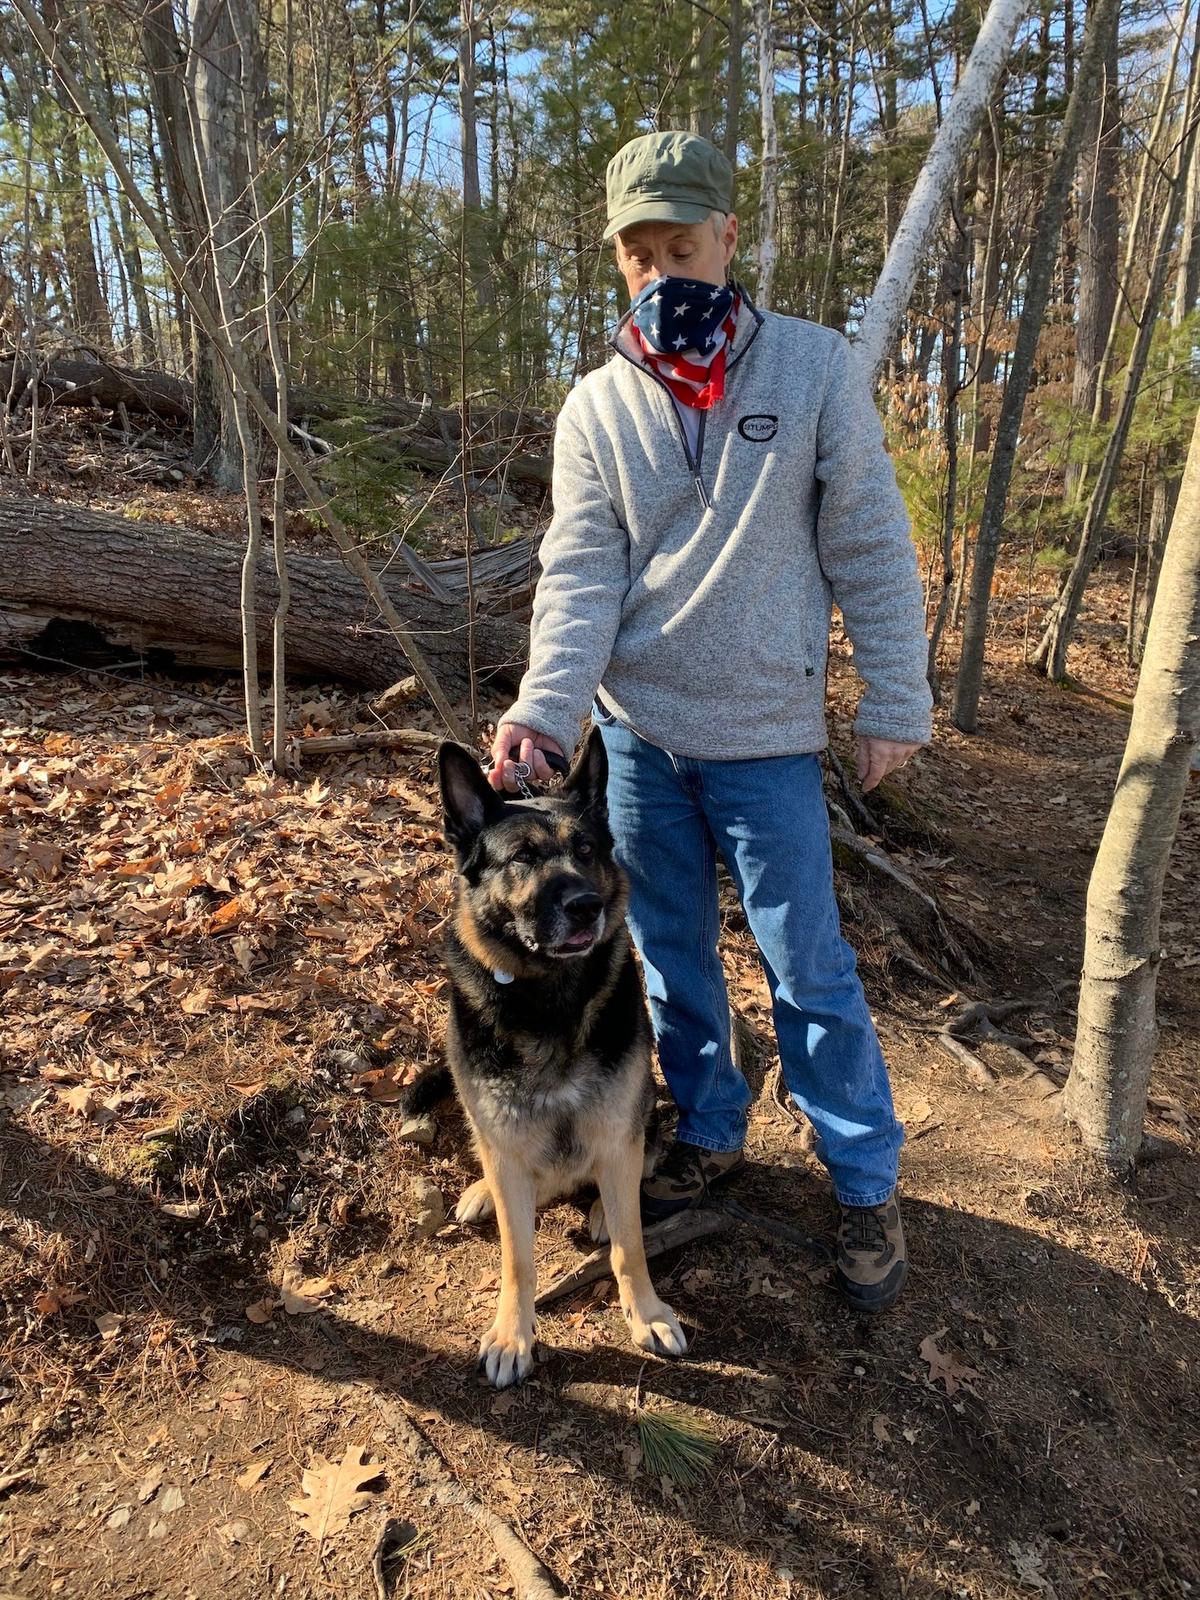 Thomas Walsh and his 5-year-old German shepherd, Diesel, helped rescue a man struggling in Quarter Mile Pond on the Stoneham and Medford town line. (Courtesy of <a href="https://stonehamfire.com/2021/03/10/stoneham-fire-department-responds-after-man-falls-through-ice-at-quarter-mile-pond/">Stoneham Fire Department</a>)